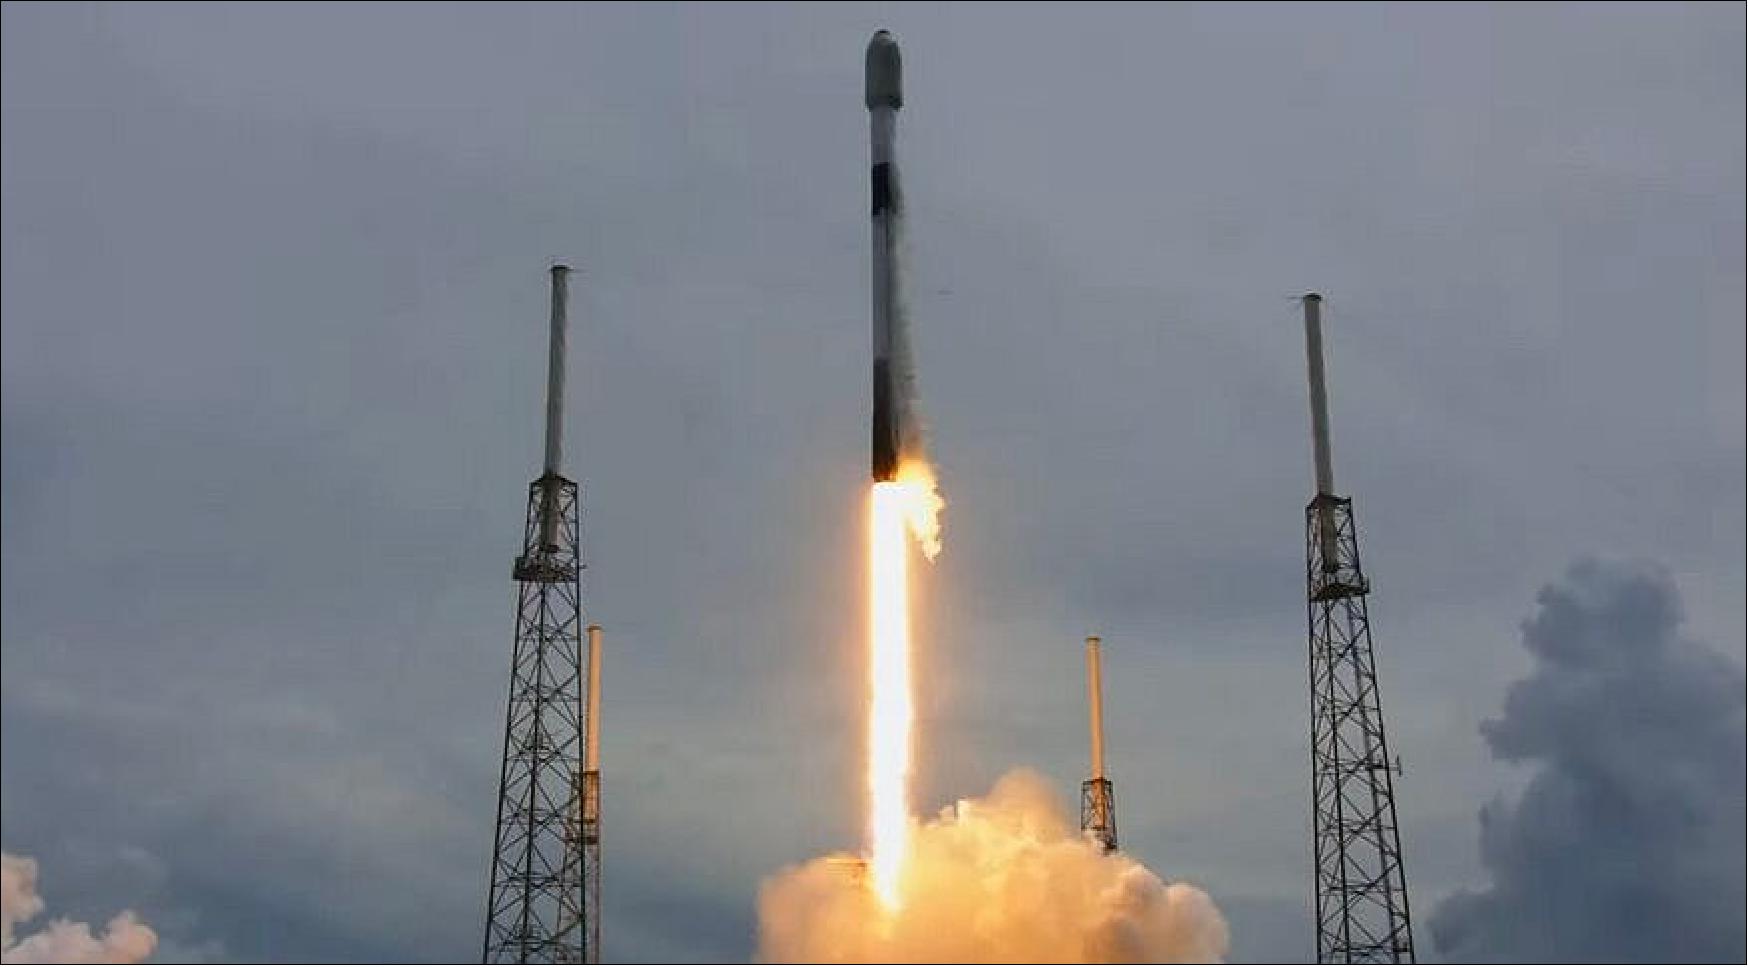 Figure 5: A SpaceX Falcon 9 lifts off June 30 on the Transporter-2 rideshare mission, with 88 satellites on board (image credit: SpaceX webcast) 10)